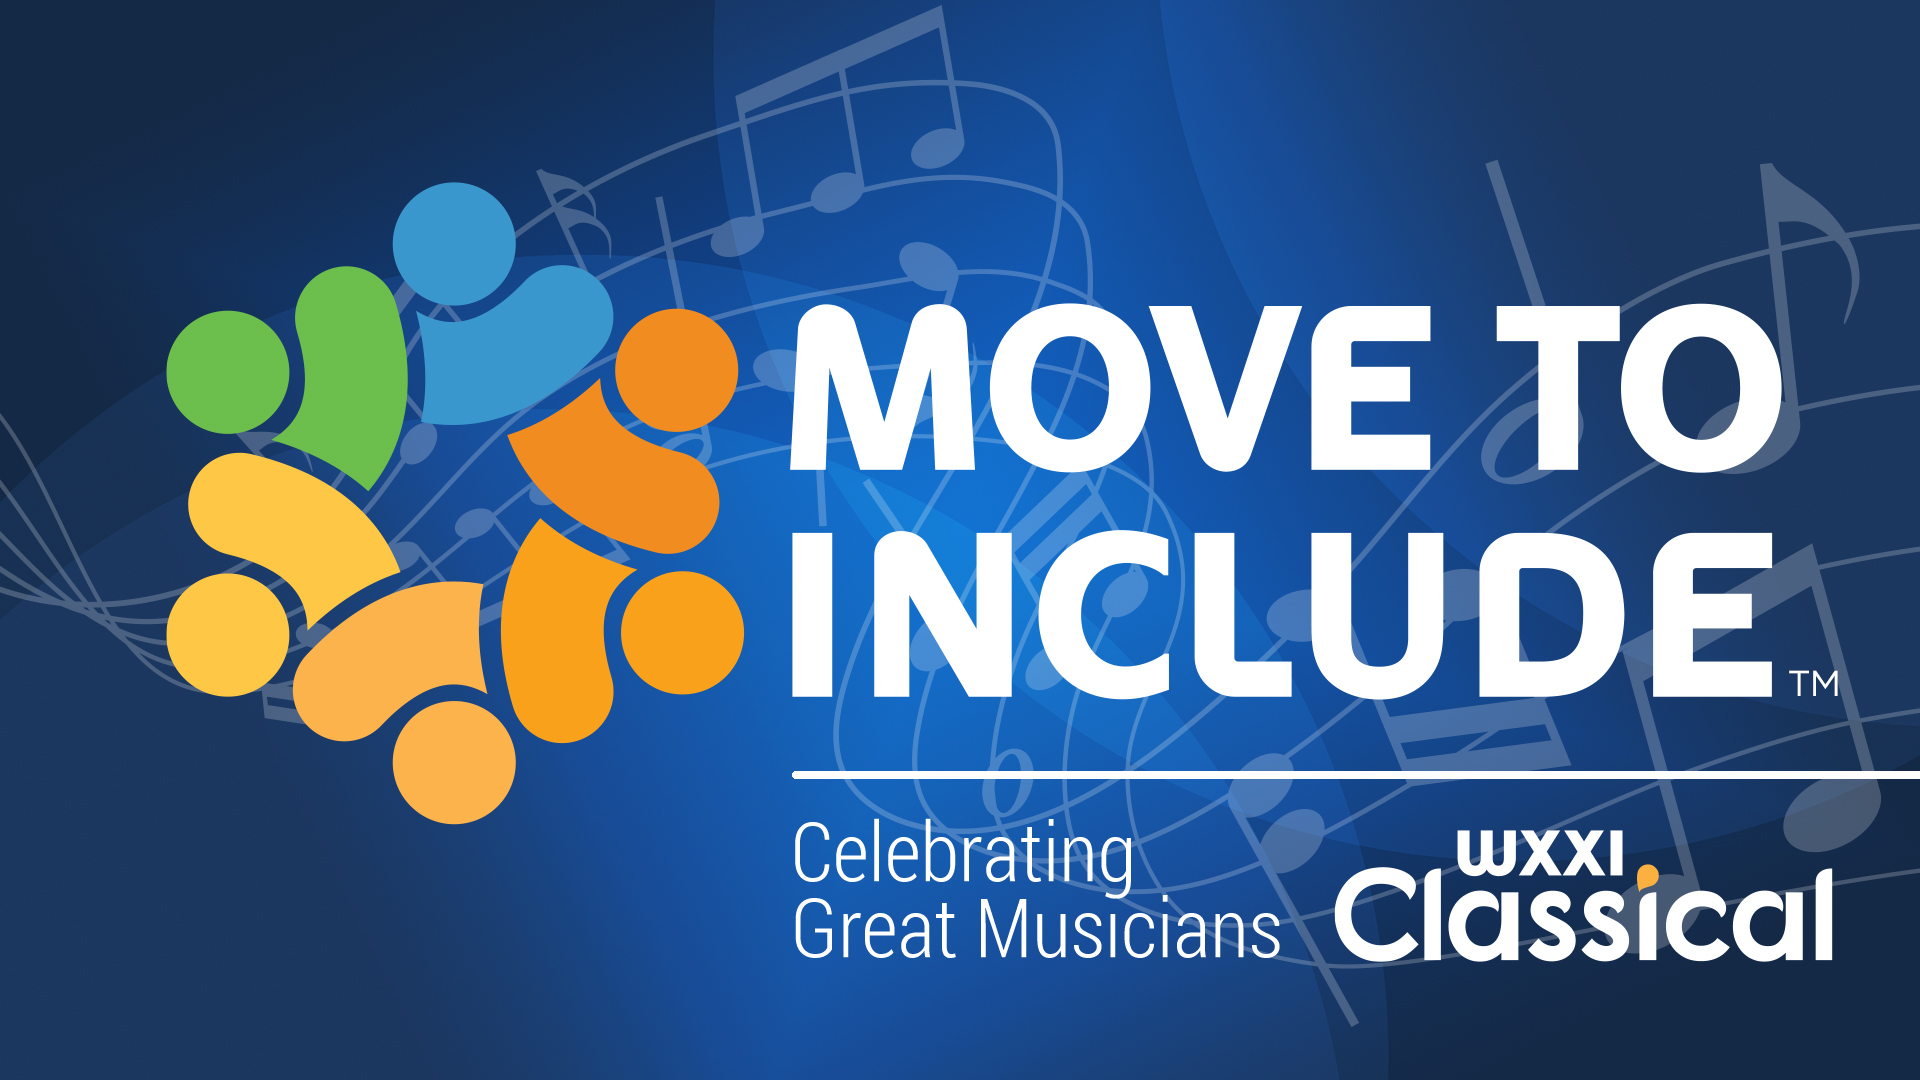 Blue banner with white type that reads: Move to Include, Celebrating Great Musicians with the WXXI Classical logo